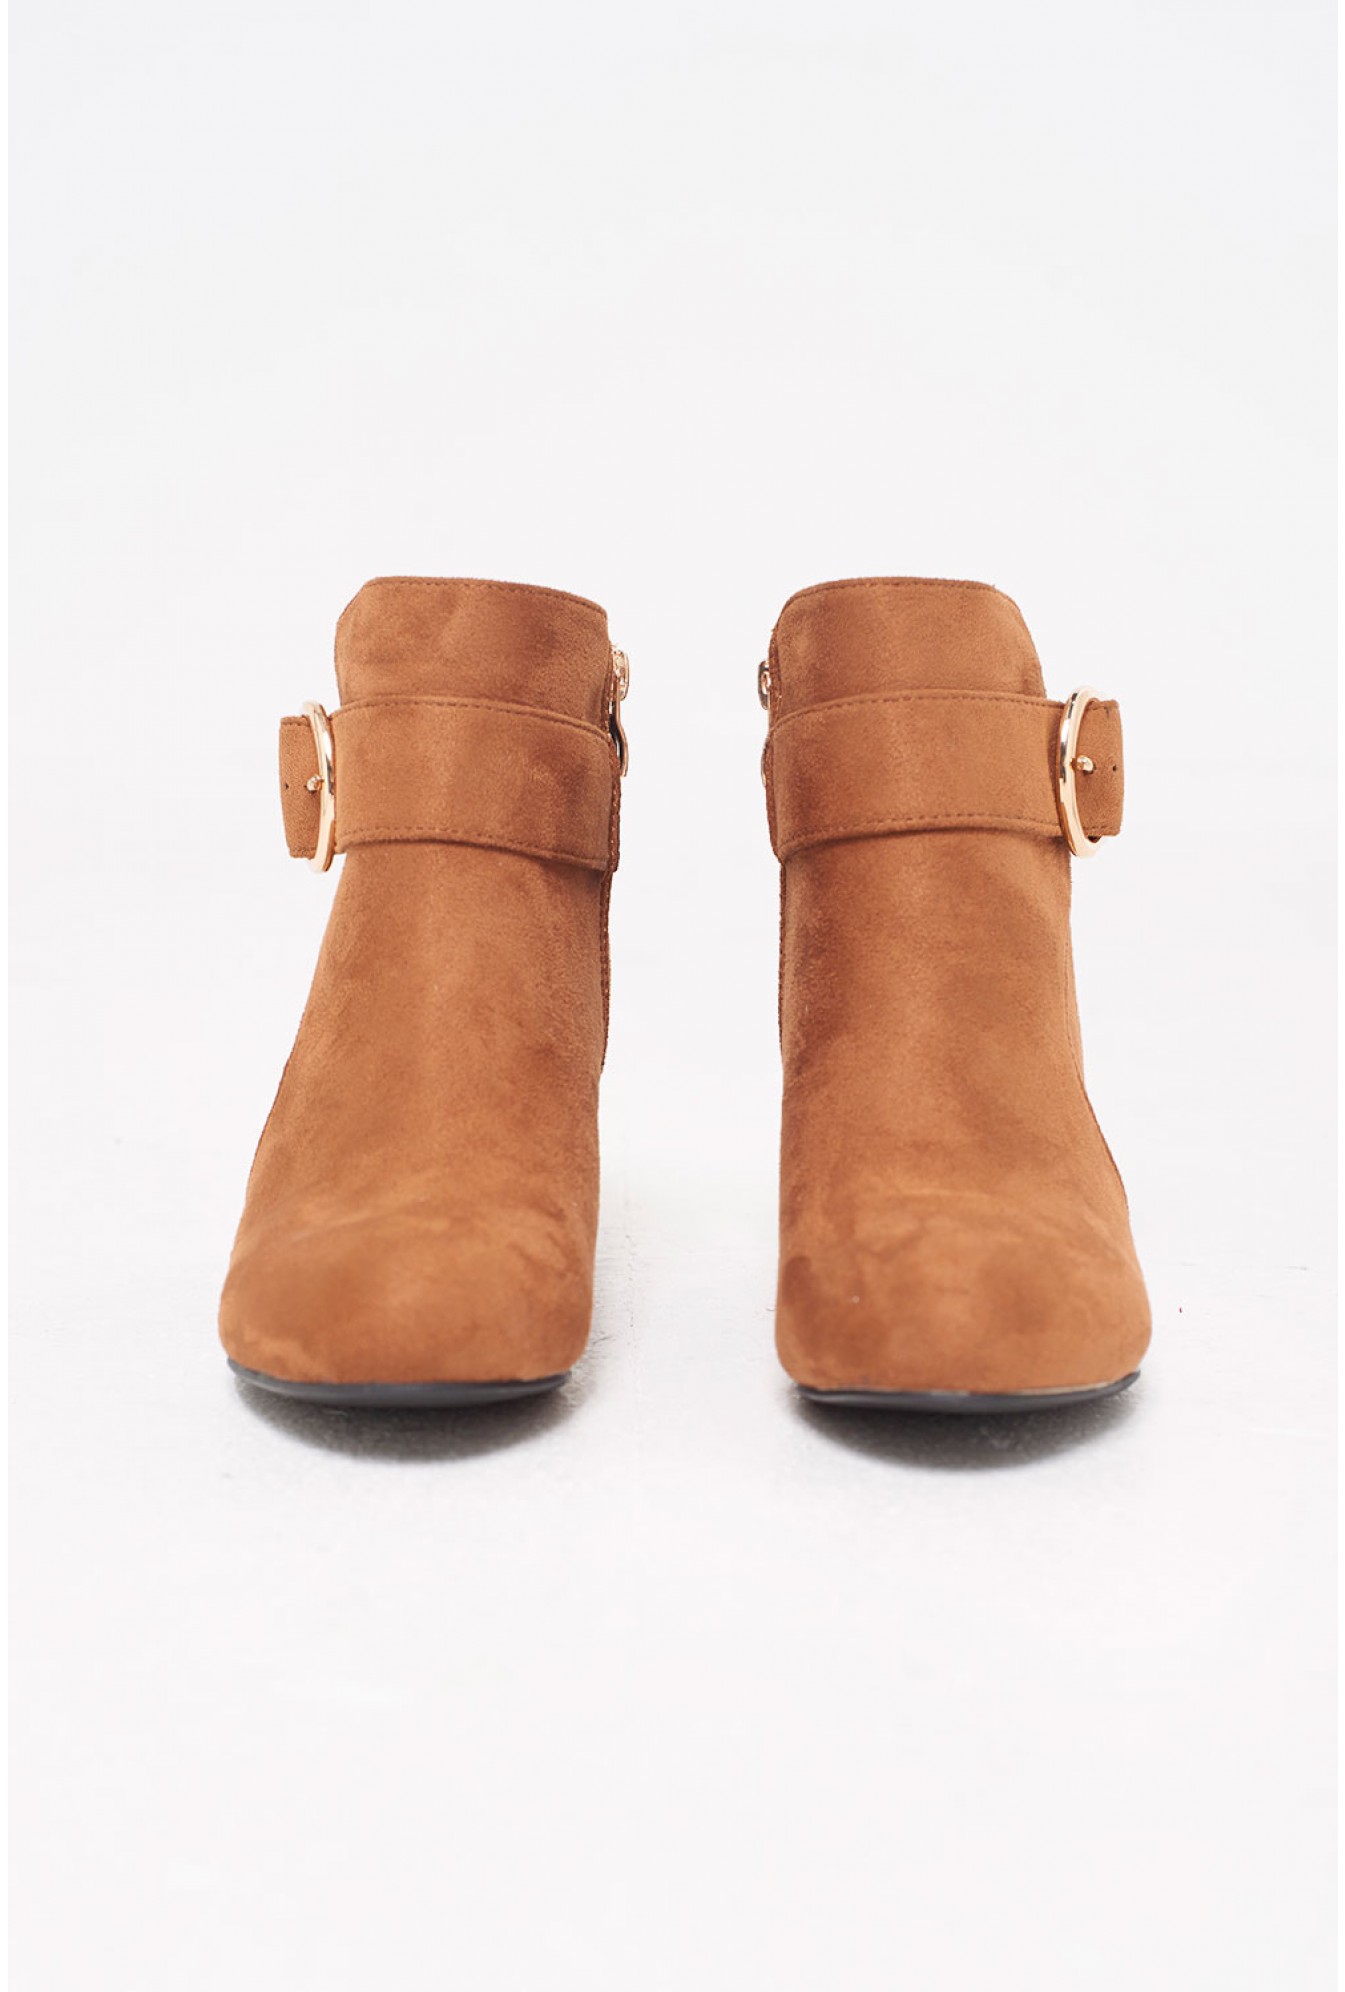 No Doubt Winter Wedge Ankle Boots in 